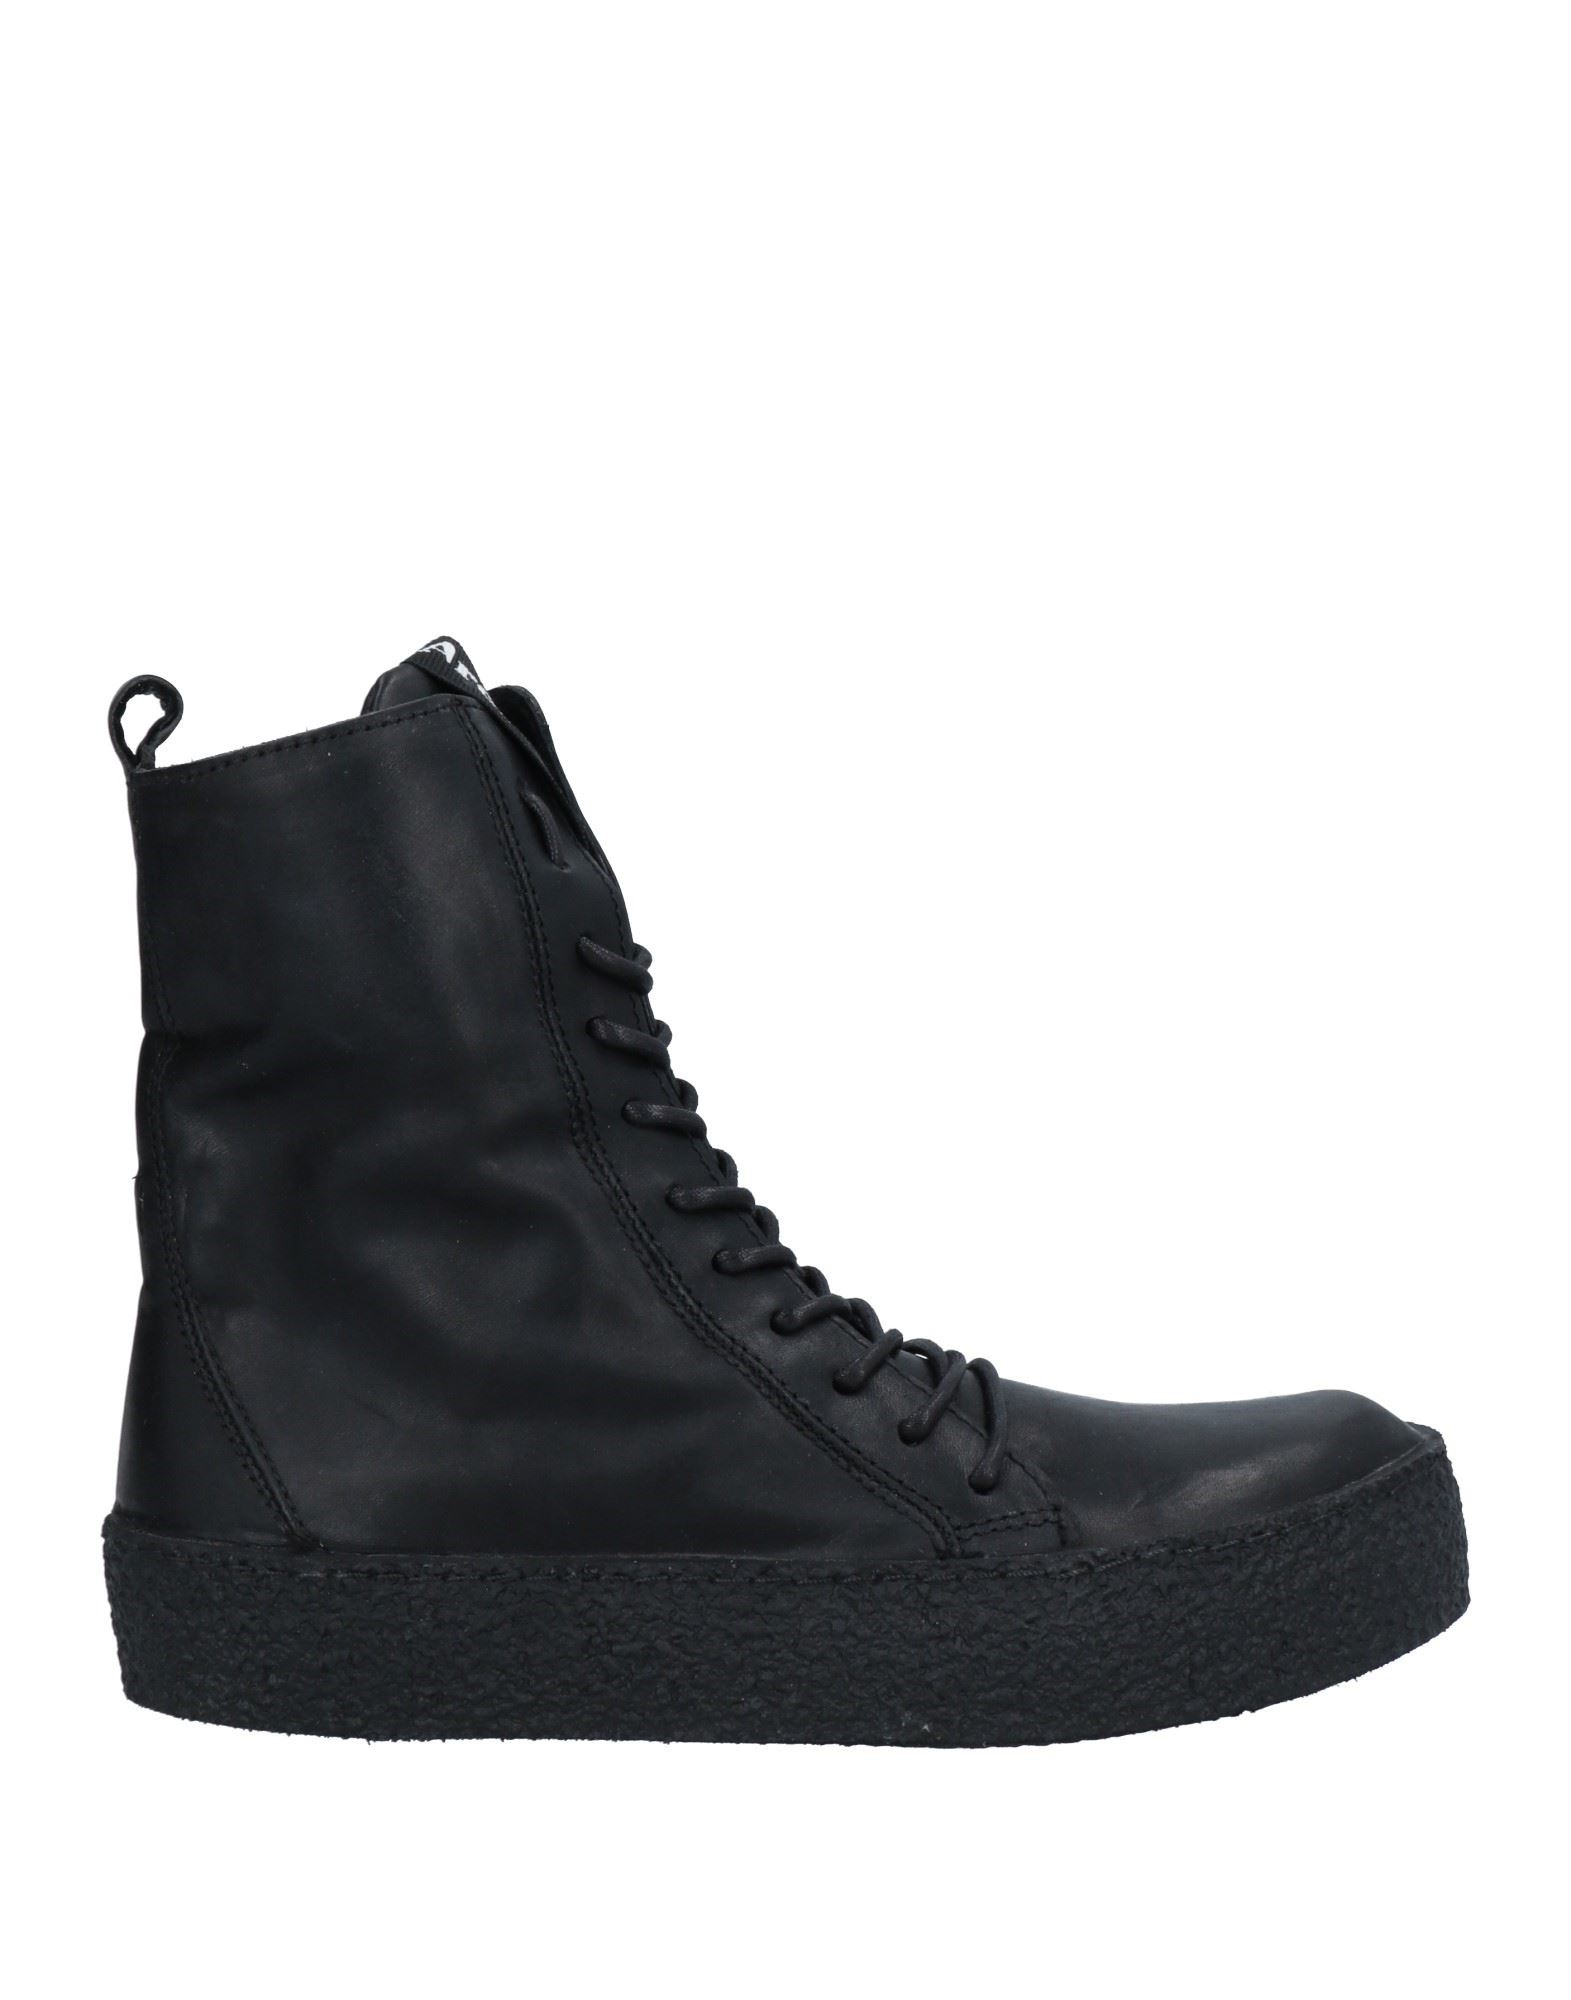 Archivio,22 Ankle Boots In Black